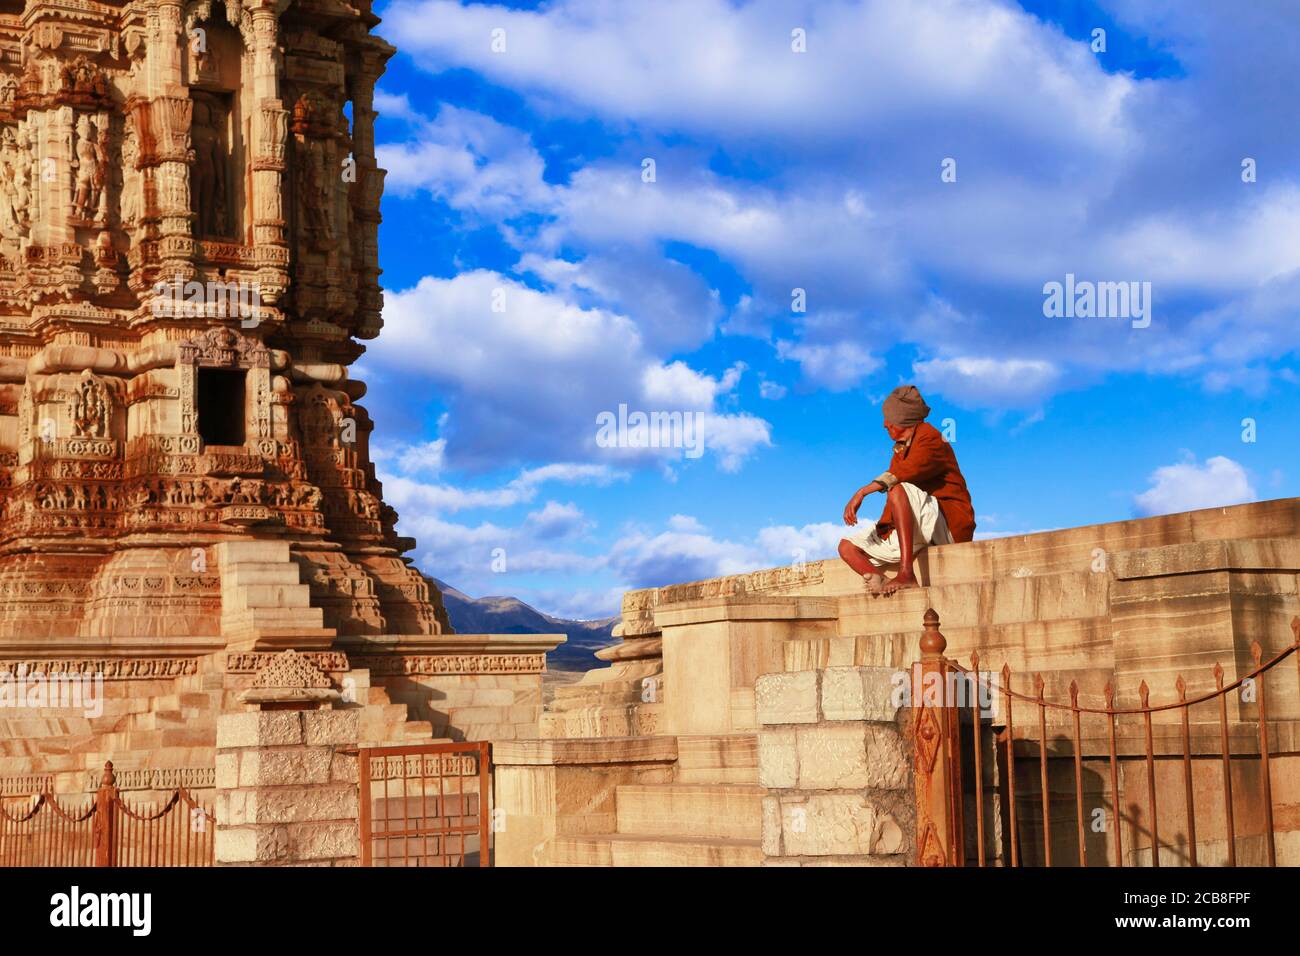 Incredible India - Chittorgarh fort. Unesco heritage site. Famous tall carved tower and old man sitting nearby.Cittor town, Rajasthan, Feb 2013 Stock Photo